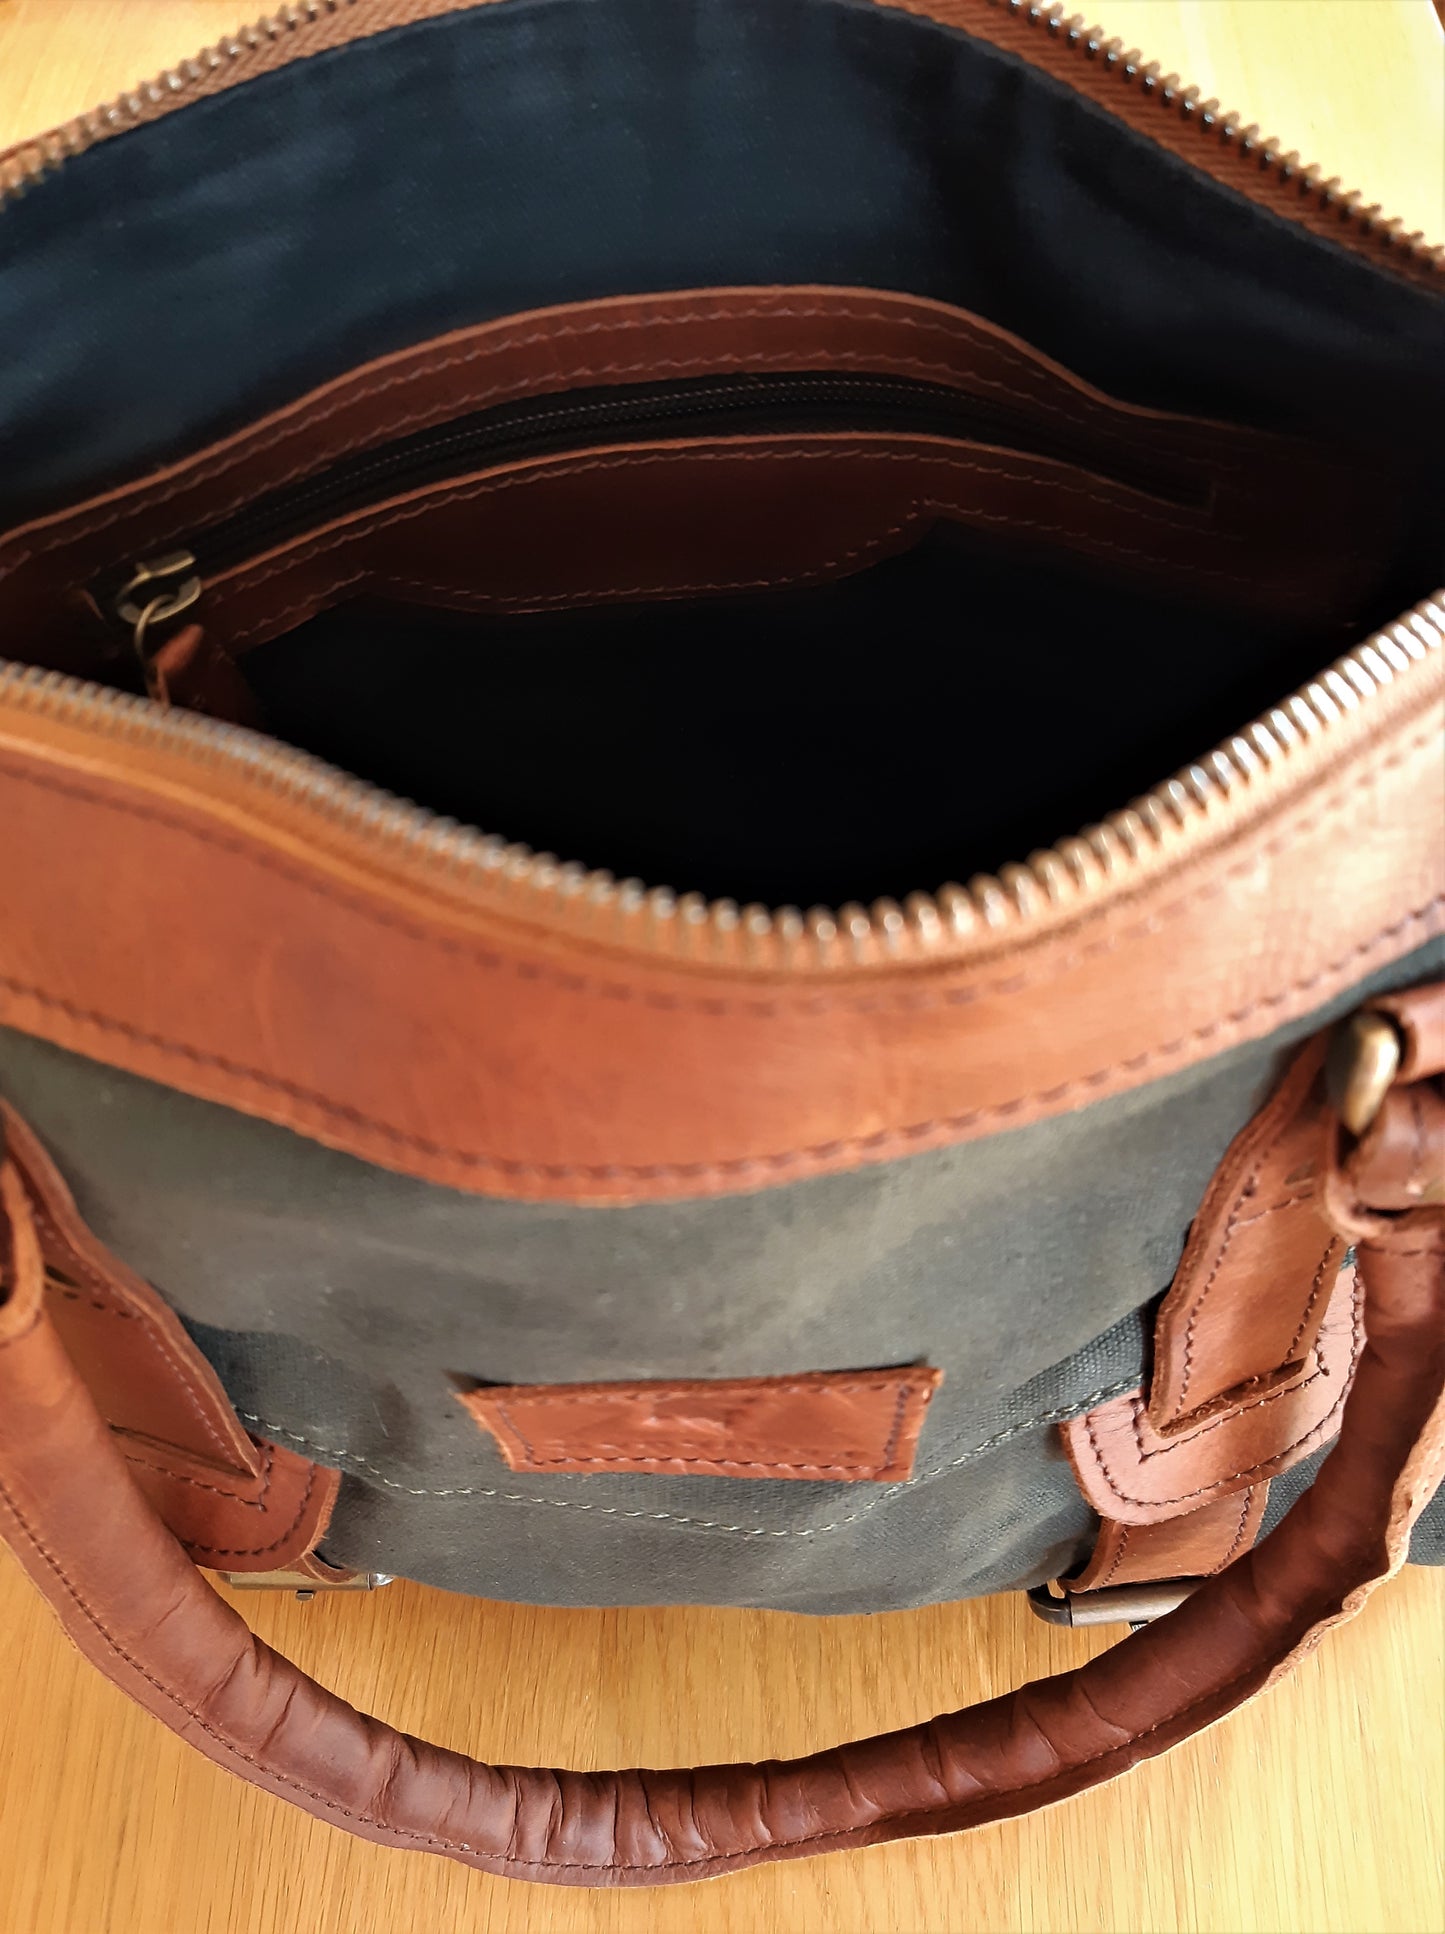 Wigham – Unique Canvas and Leather Country Style Shoulder Bag (Grade 1)